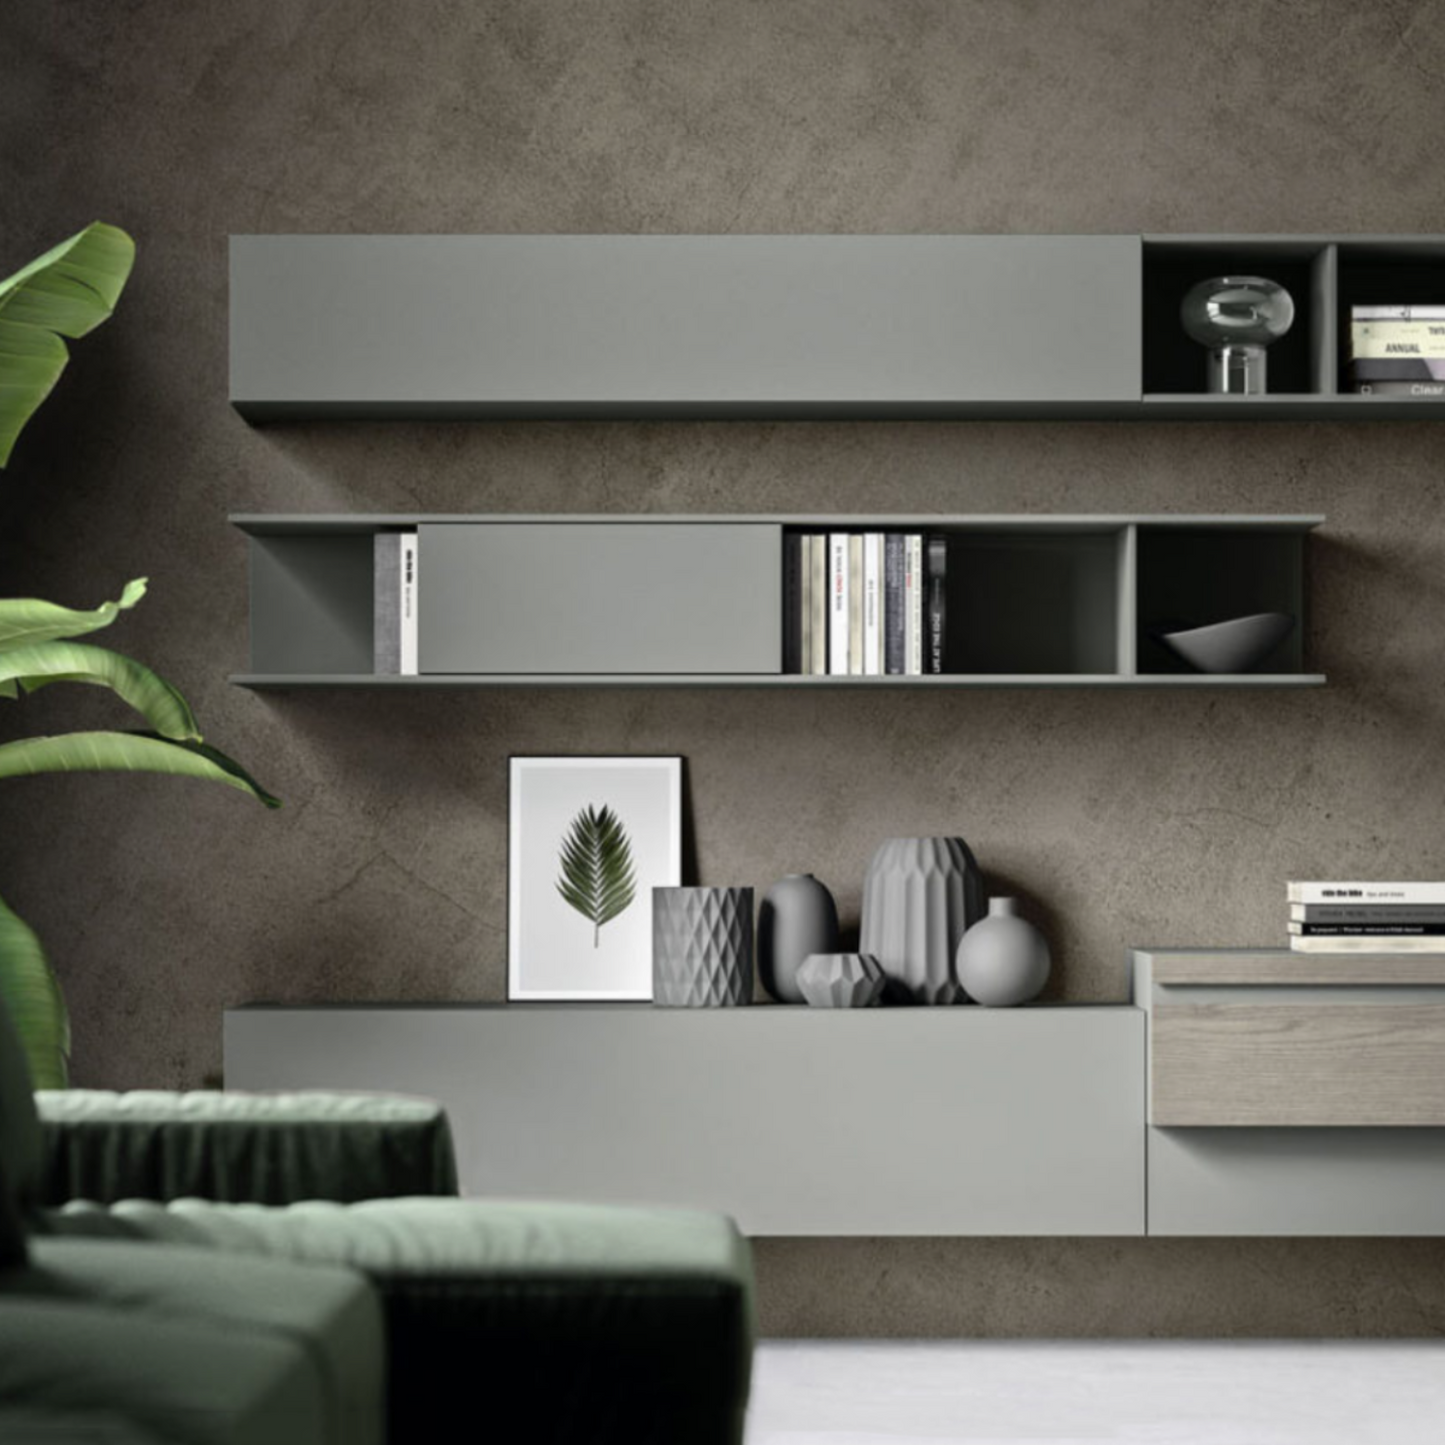 Floating Day 5 TV Media Unit by Orme